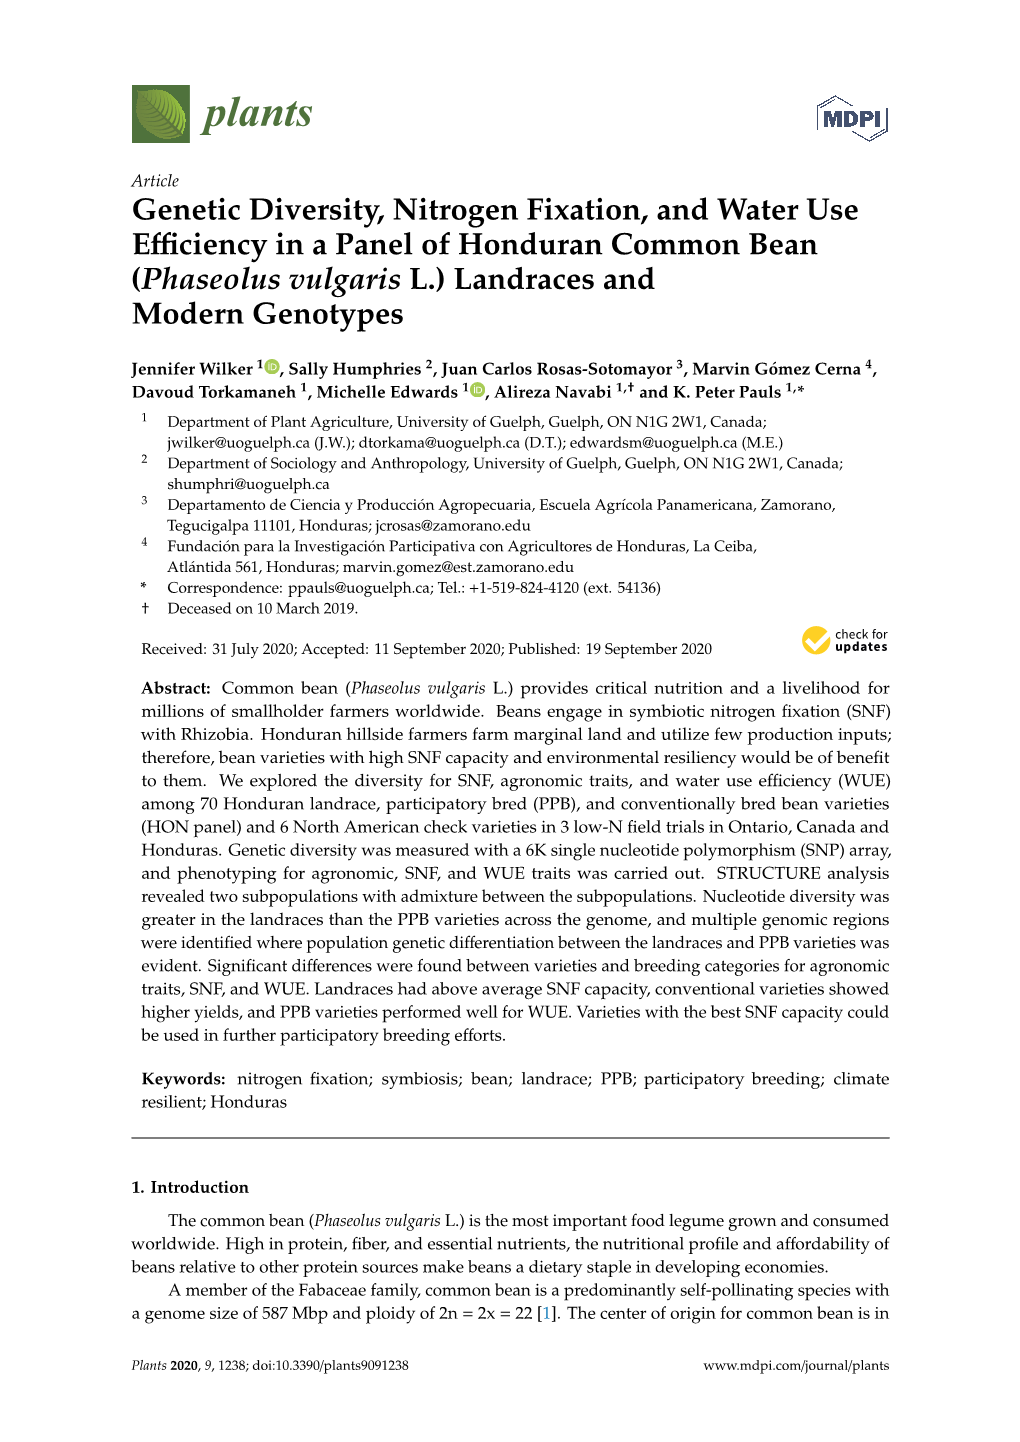 Genetic Diversity, Nitrogen Fixation, and Water Use Efficiency in a Panel of Honduran Common Bean (Phaseolus Vulgaris L.) Landraces and Modern Genotypes